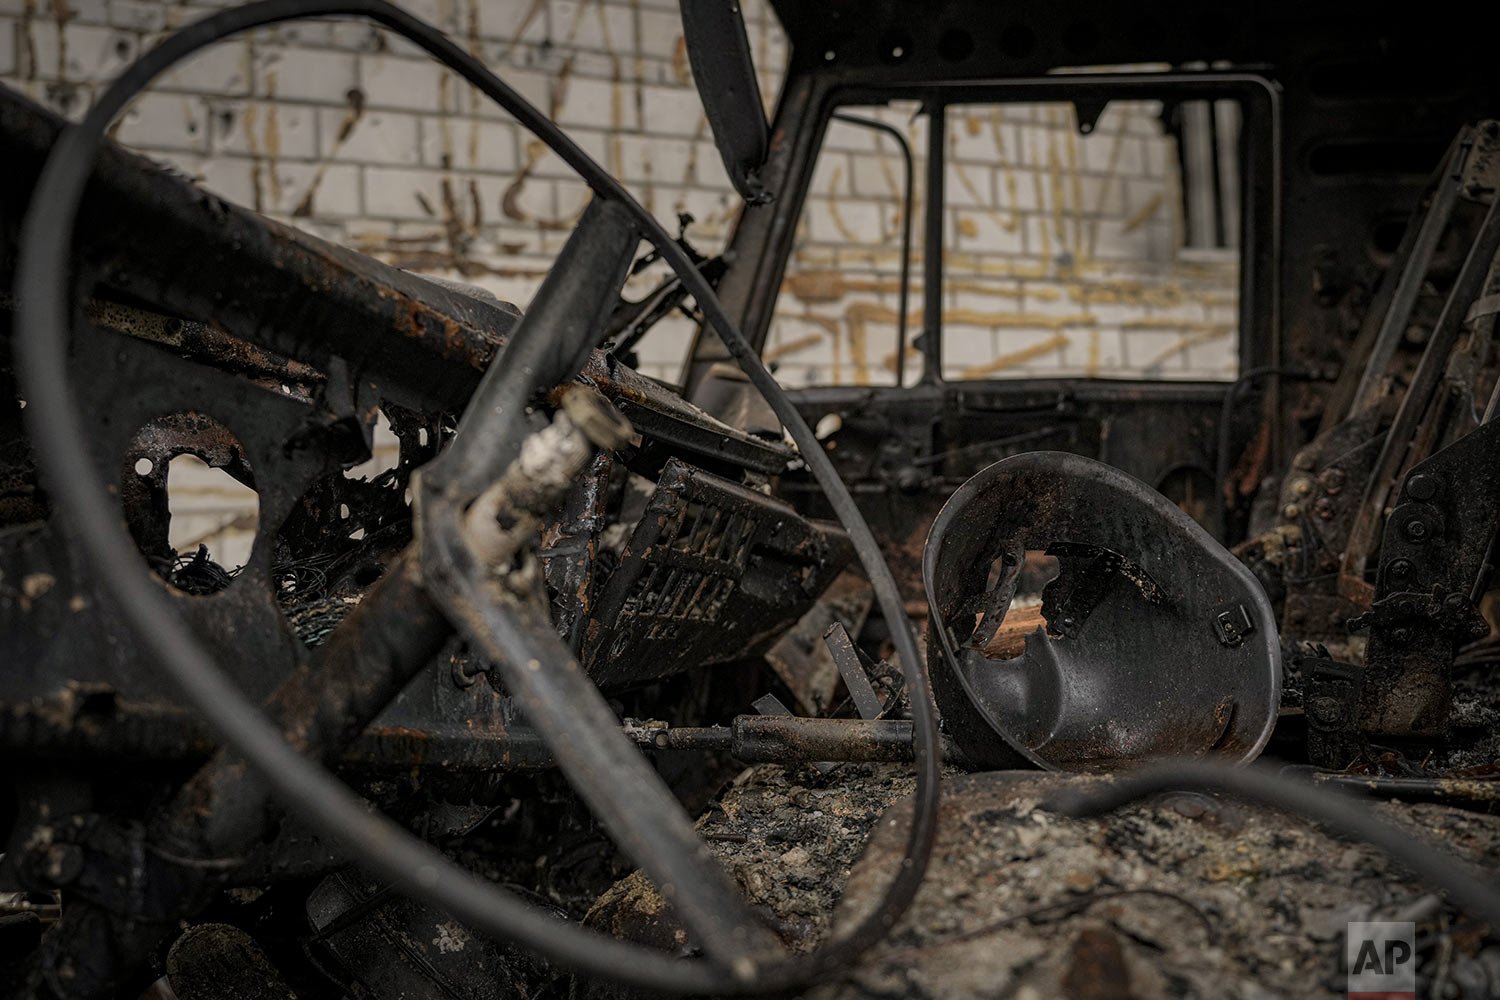  A pierced helmet lies in the cabin of a Russian military truck, destroyed during fighting between Russian and Ukrainian forces, outside of Kyiv, Ukraine, Friday, April 1, 2022. (AP Photo/Vadim Ghirda) 